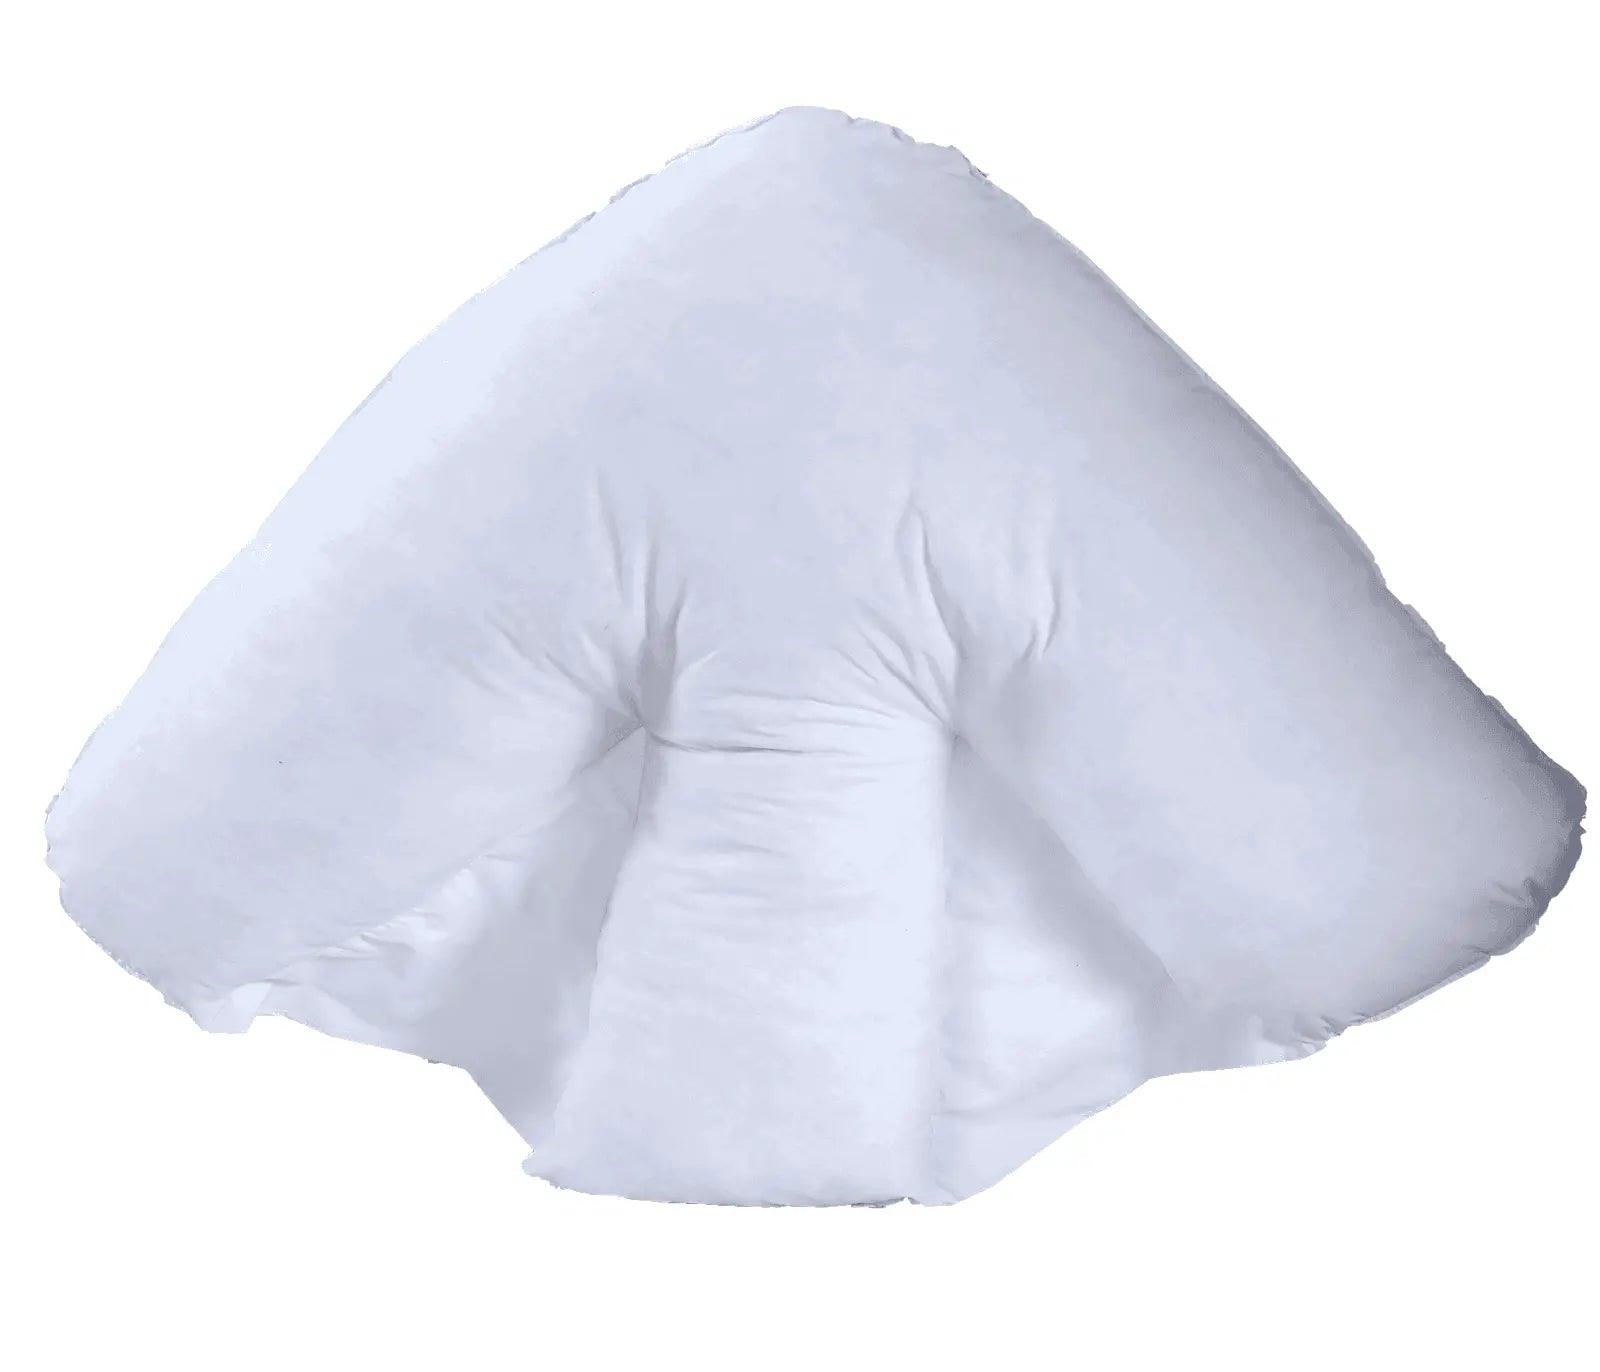 batwing pillow hollowfibre filled